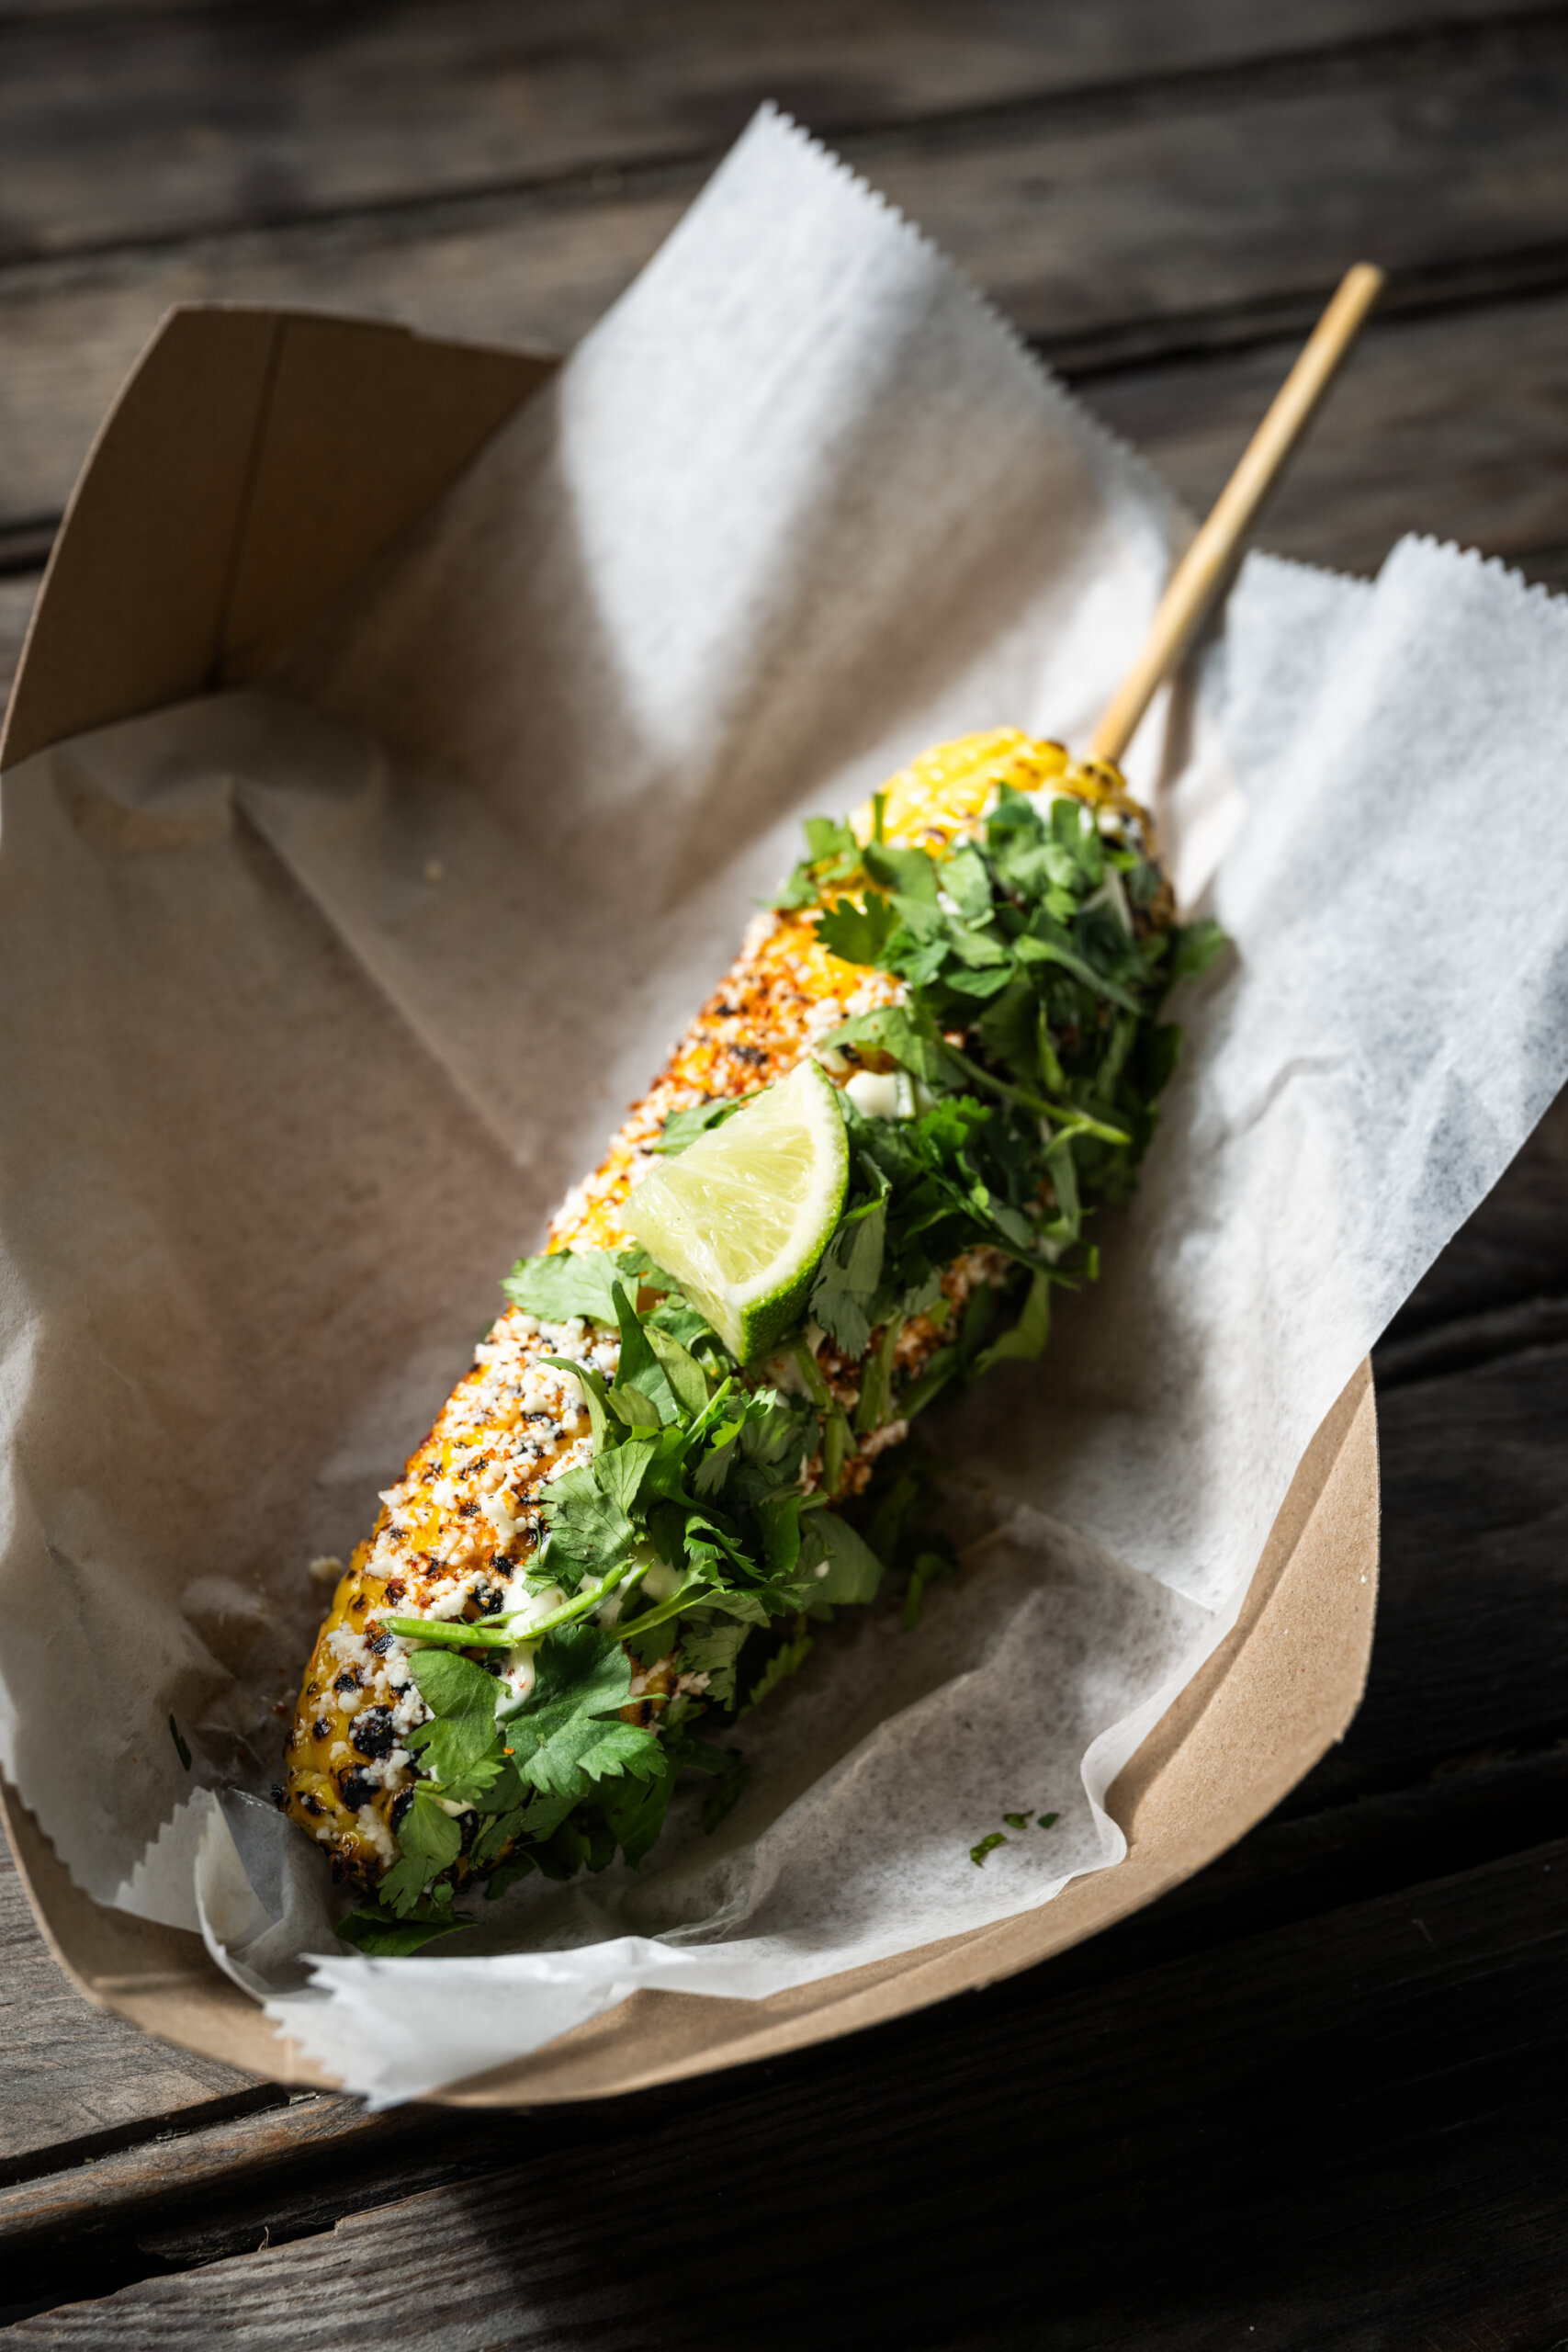 An ear of elote corn with lime and cilantro